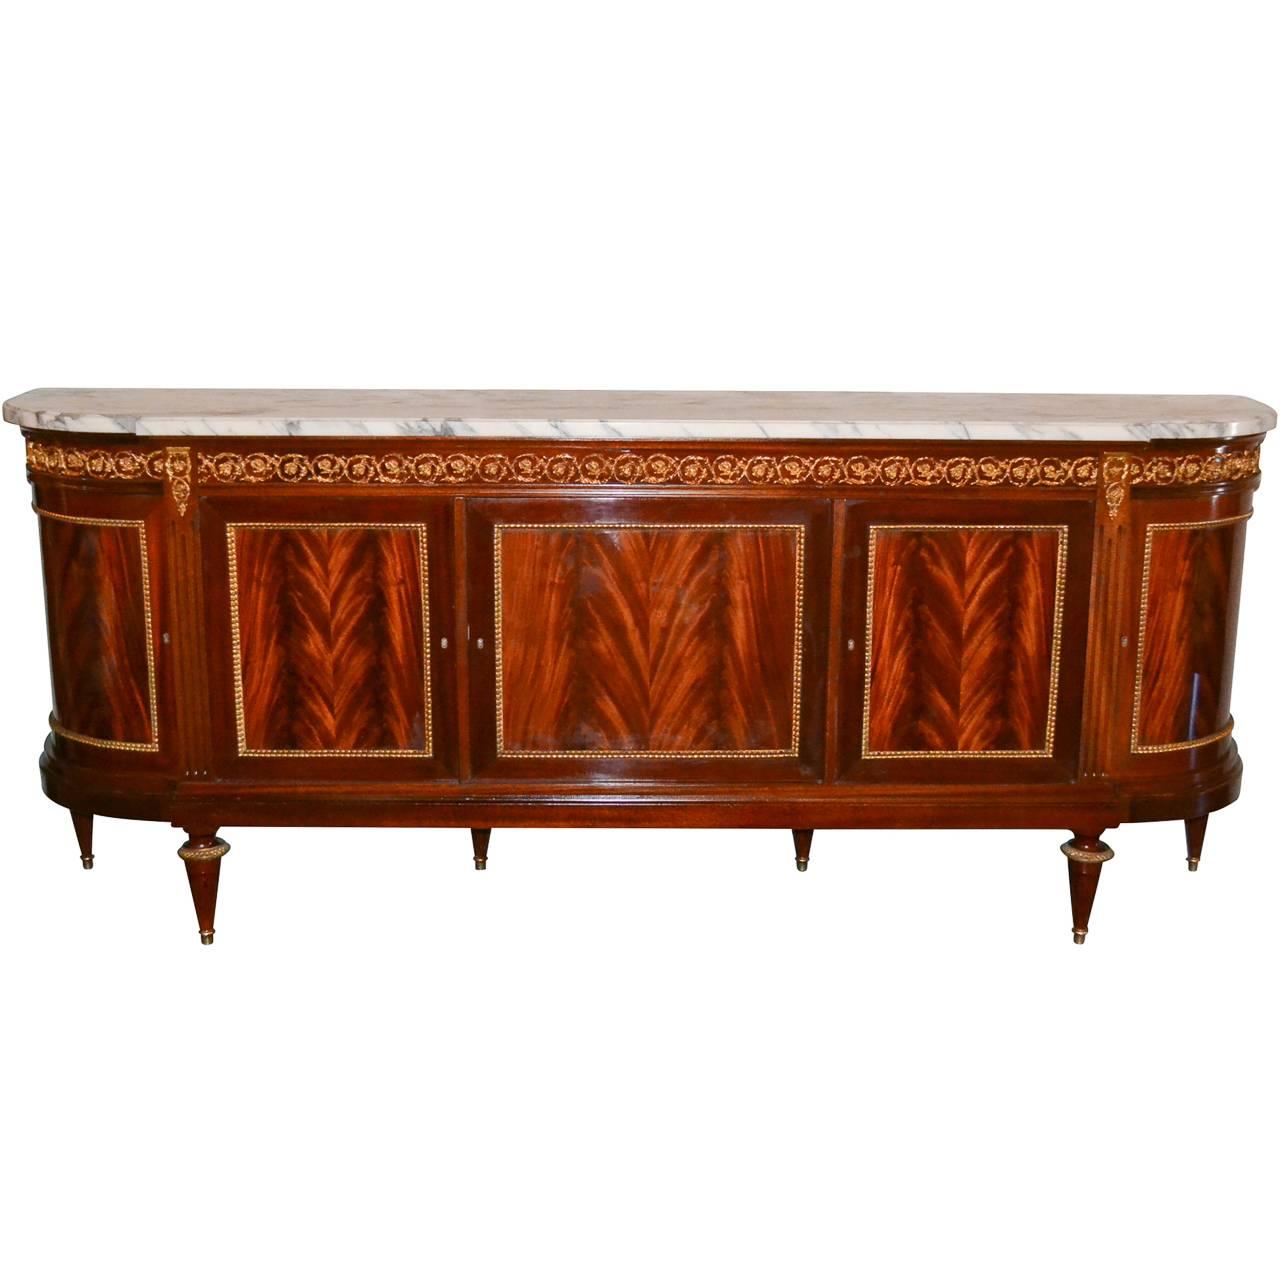 Superb French Bronze-Mounted Sideboard